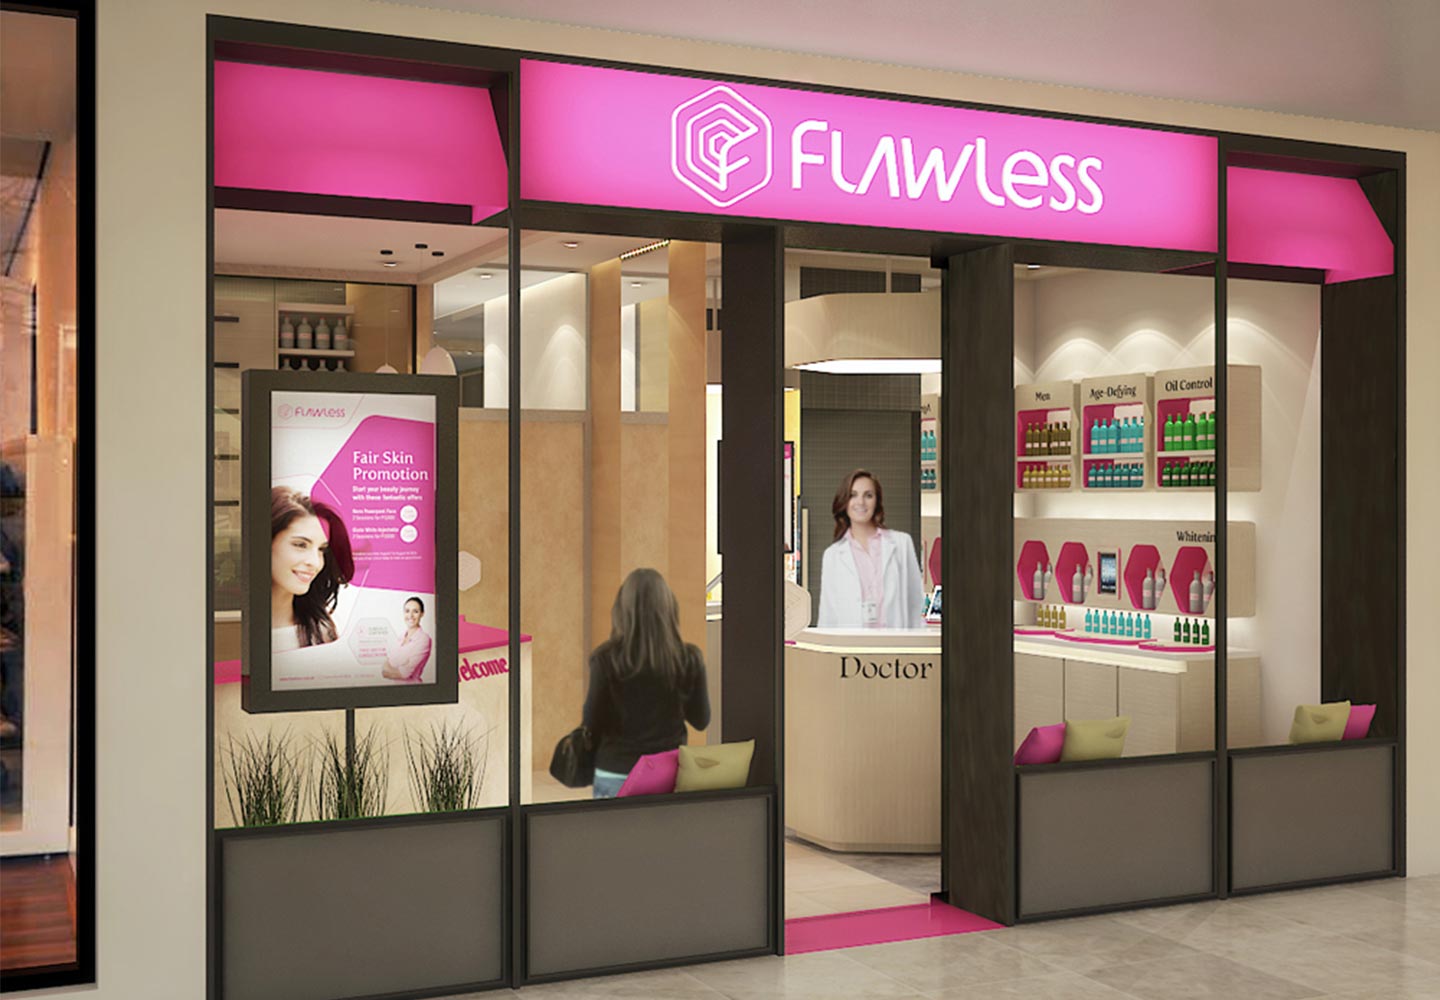 Brand Consultancy in Lifestyle Industry. Signage for Flawless.